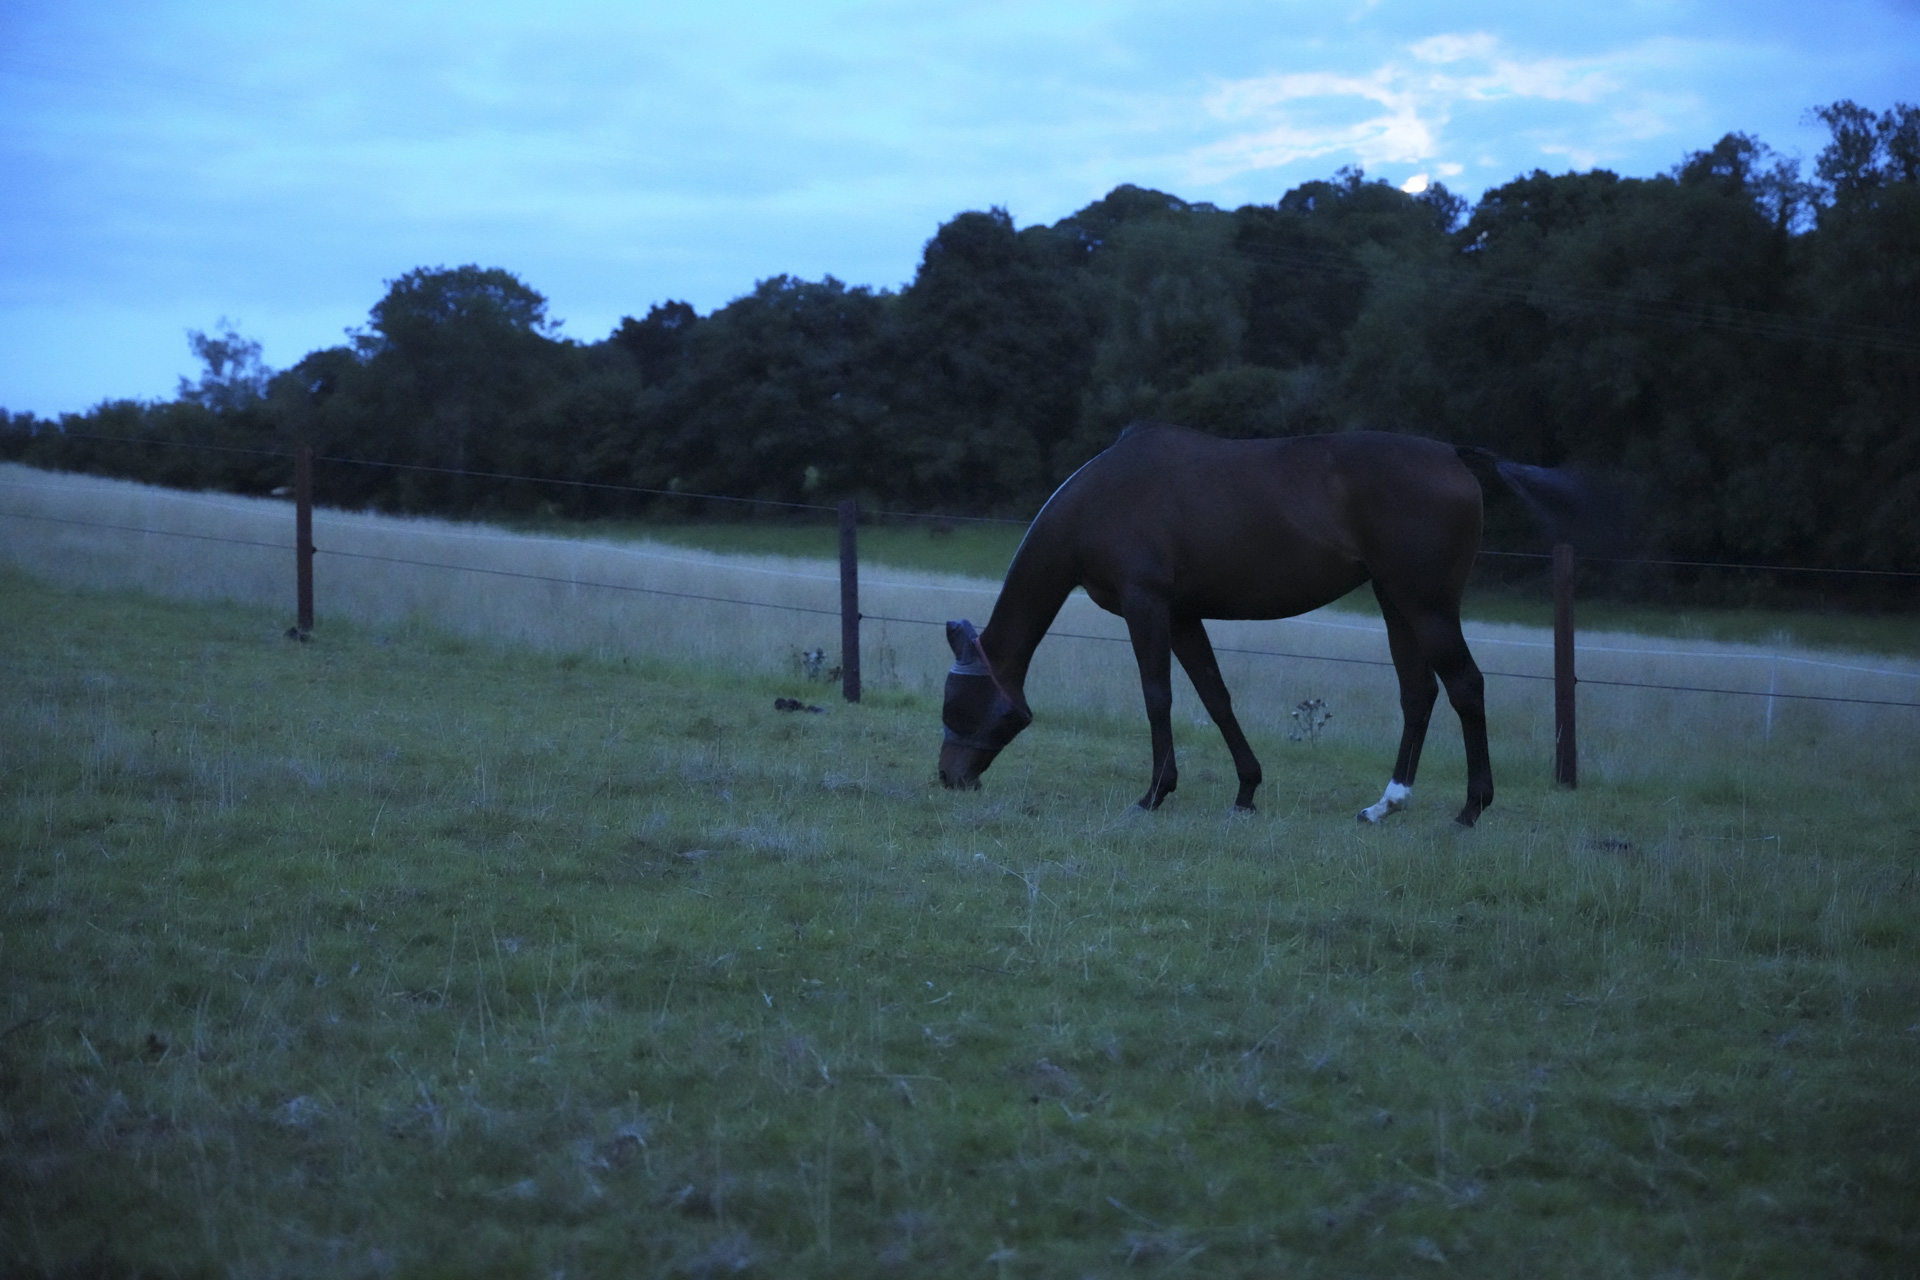 Horses at twilight, taken with the Sony FE 20-70mm F4 lens and A7C R